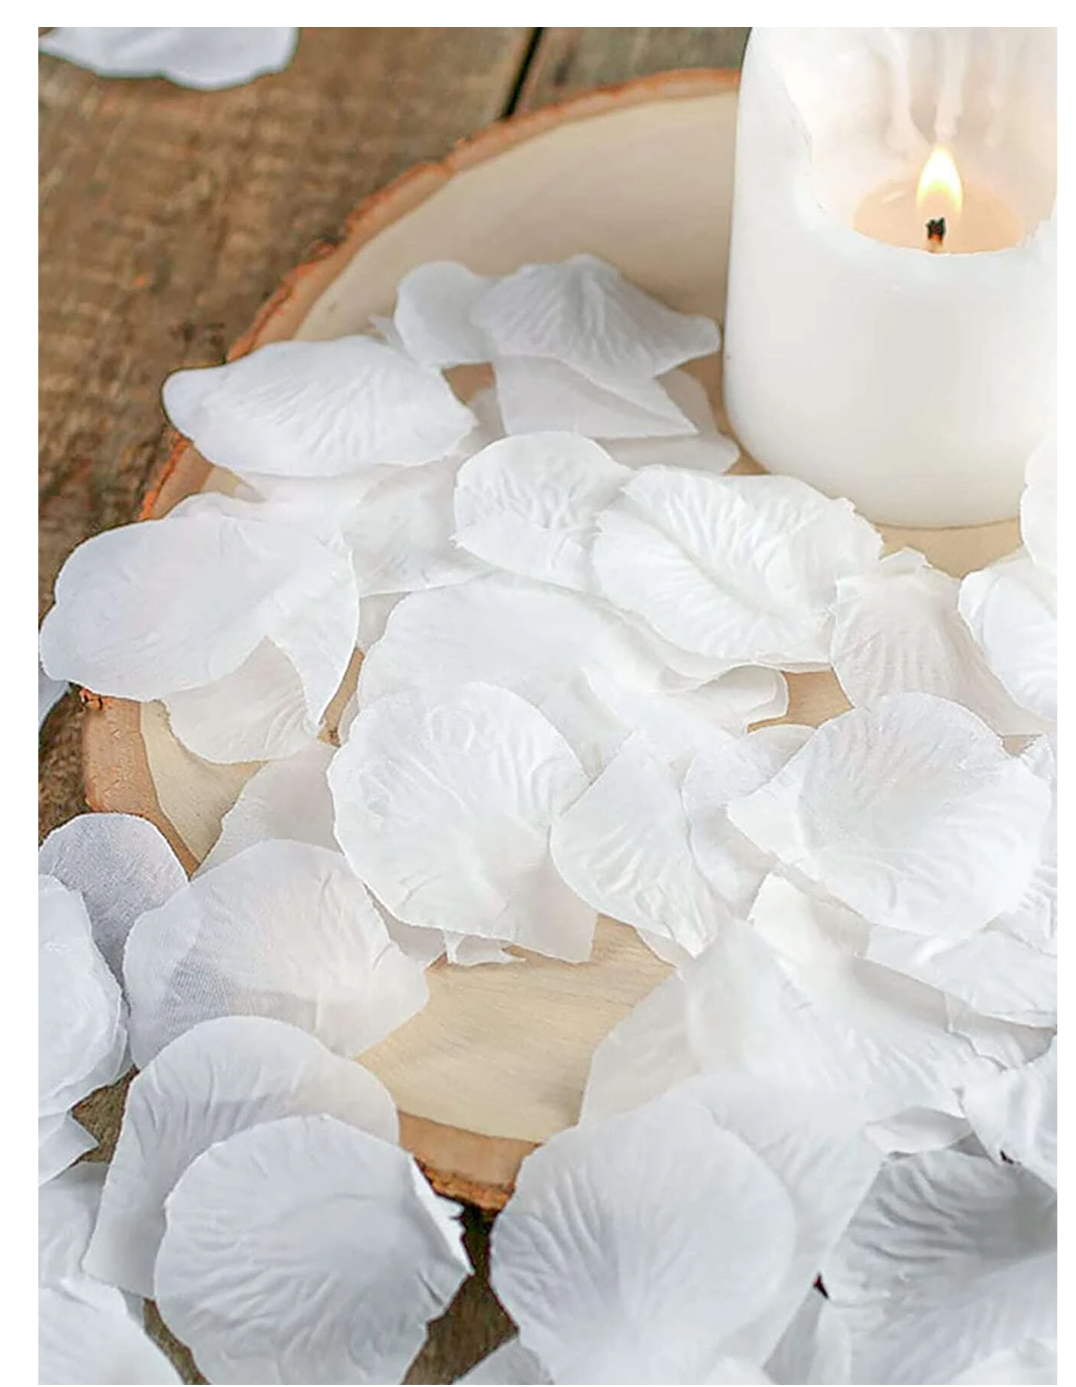 Blooms of Love: 1200pcs Artificial Rose Petals, the Perfect Floral Touch for Valentine's Day and Weddings!